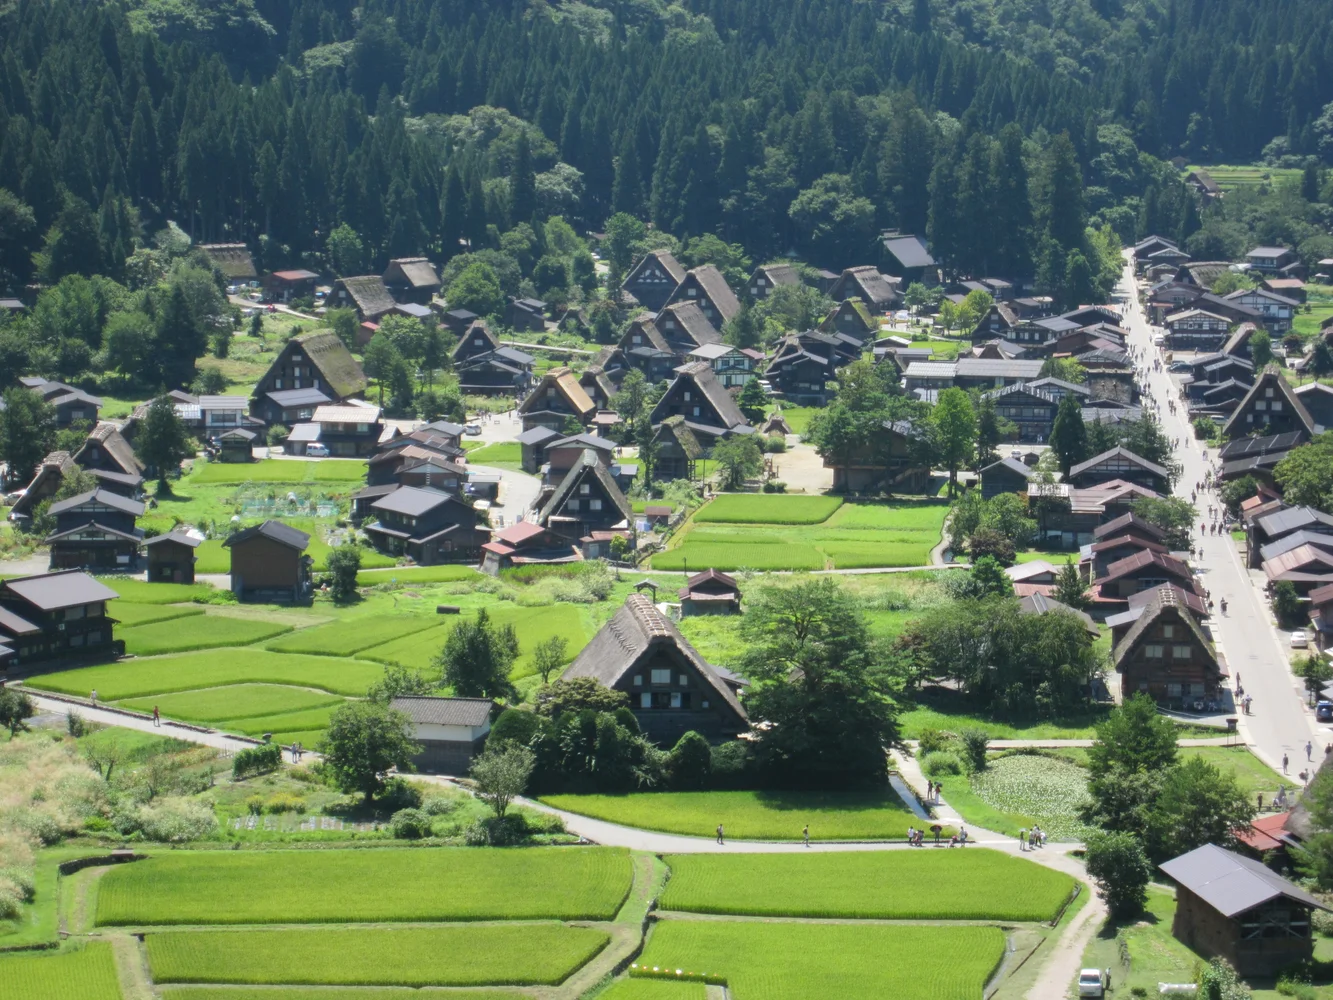 Starting from Kanazawa, where rich history and tradition are alive, we will guide you on a luxurious day trip bus tour that goes around the World Heritage Site "Shirakawa-go" and the charming "Hida Takayama"!